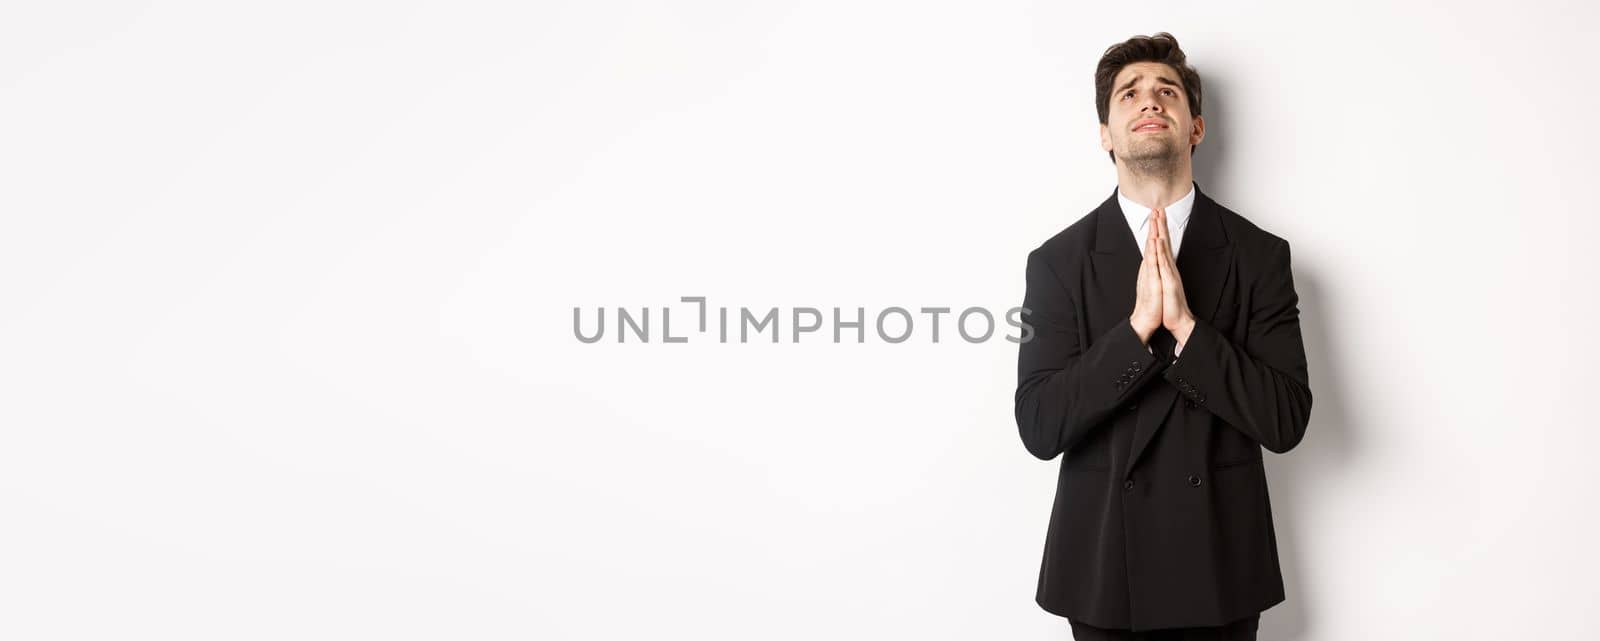 Troubled and hopeful man in black suit begging god, pleading and looking up, need help, standing over white background.